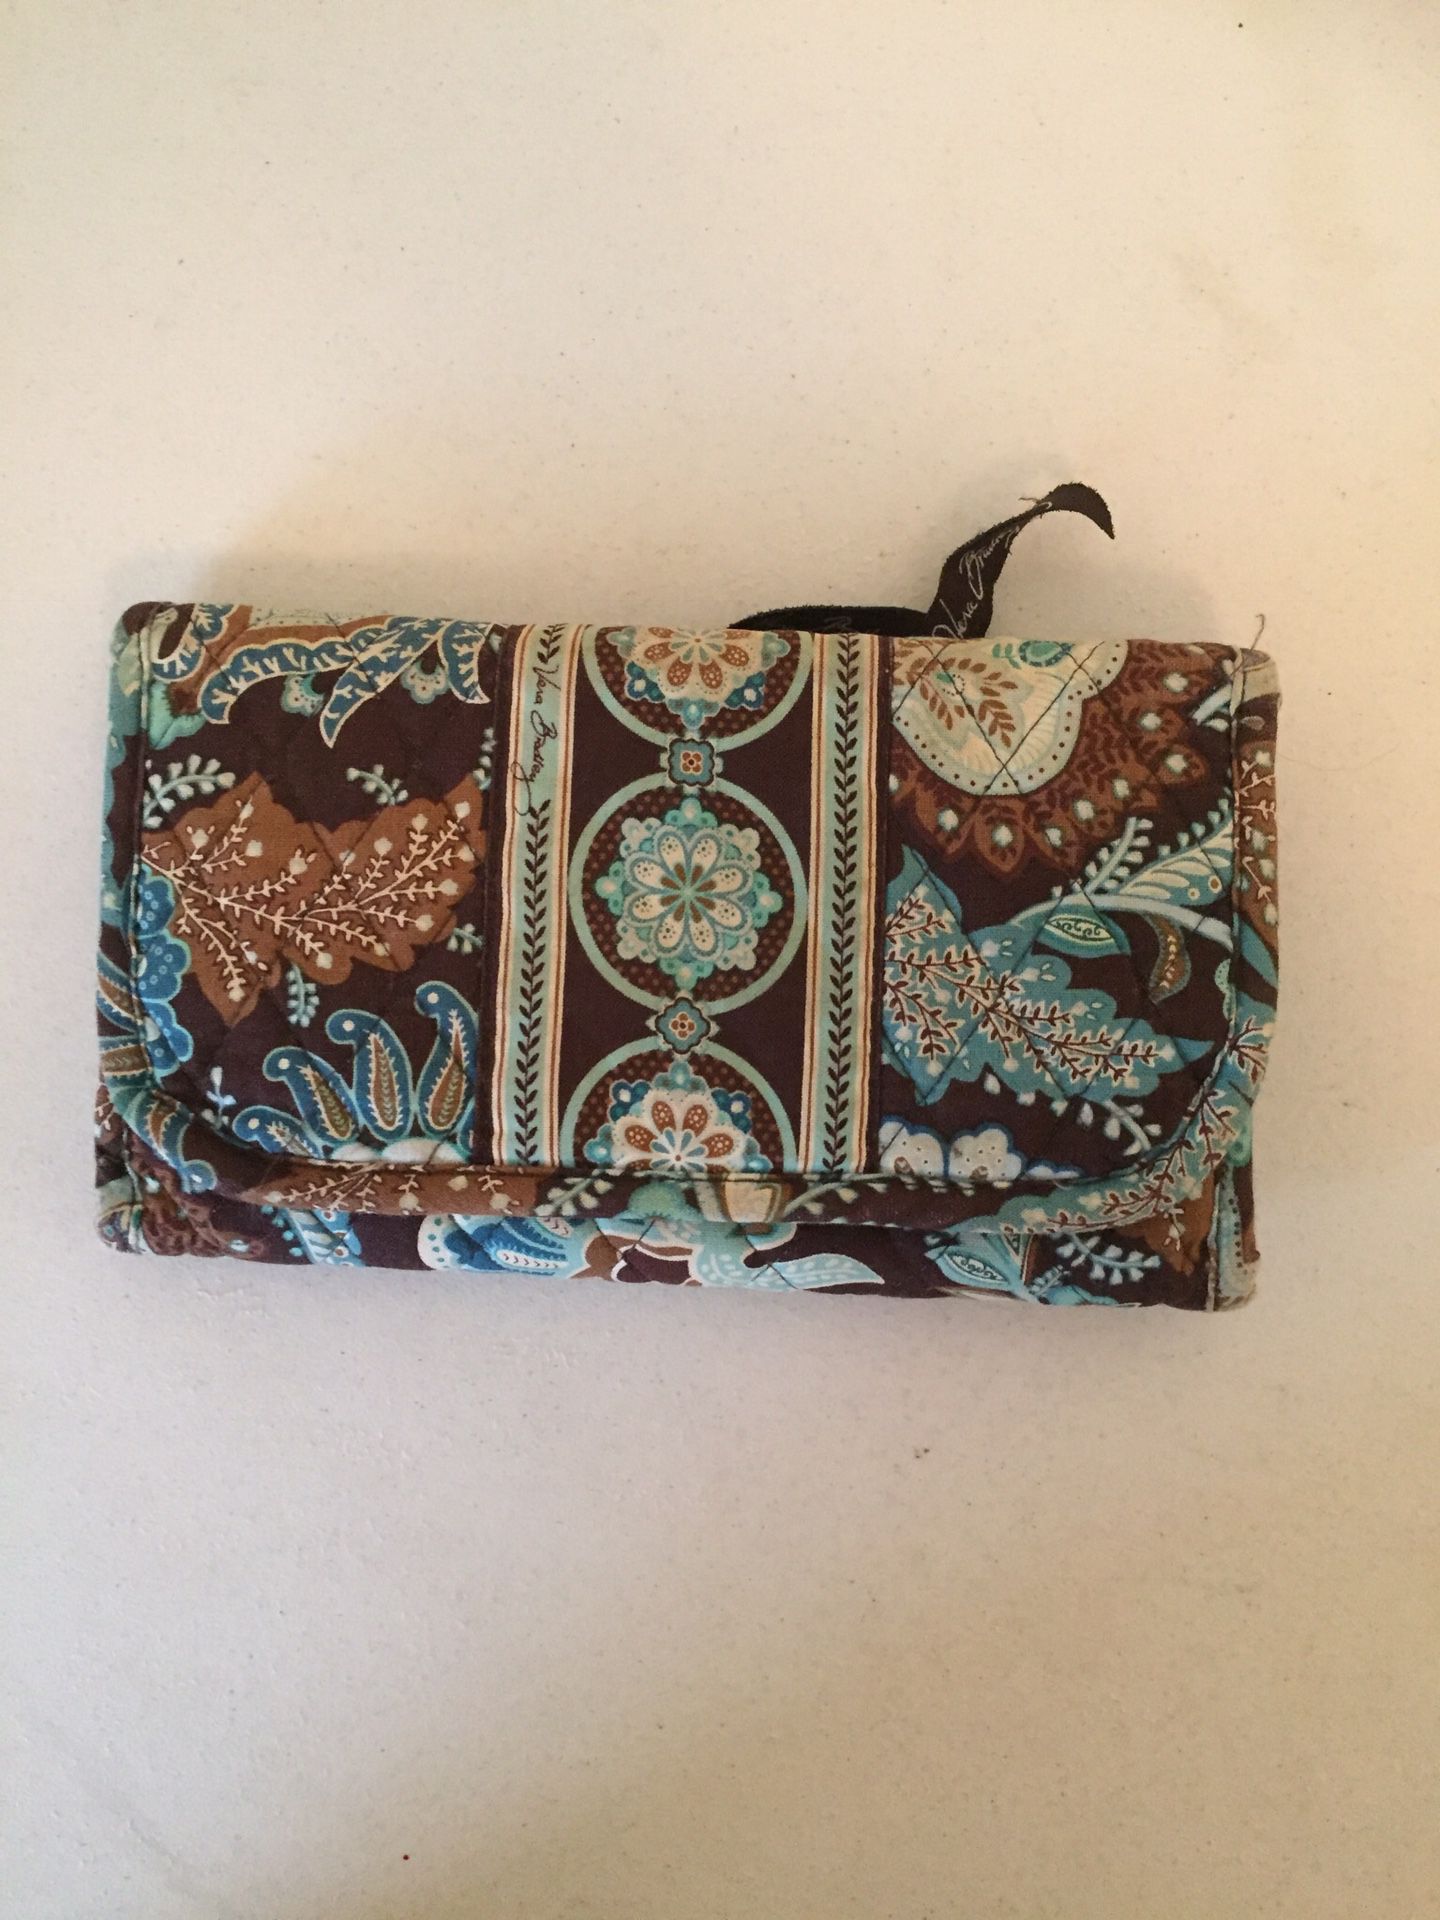 Retired Vera Bradley Java Blue and Brown Paisley Trifold Wallet and Retired Vera Bradley Java Blue and Brown Paisley Checkbook Cover